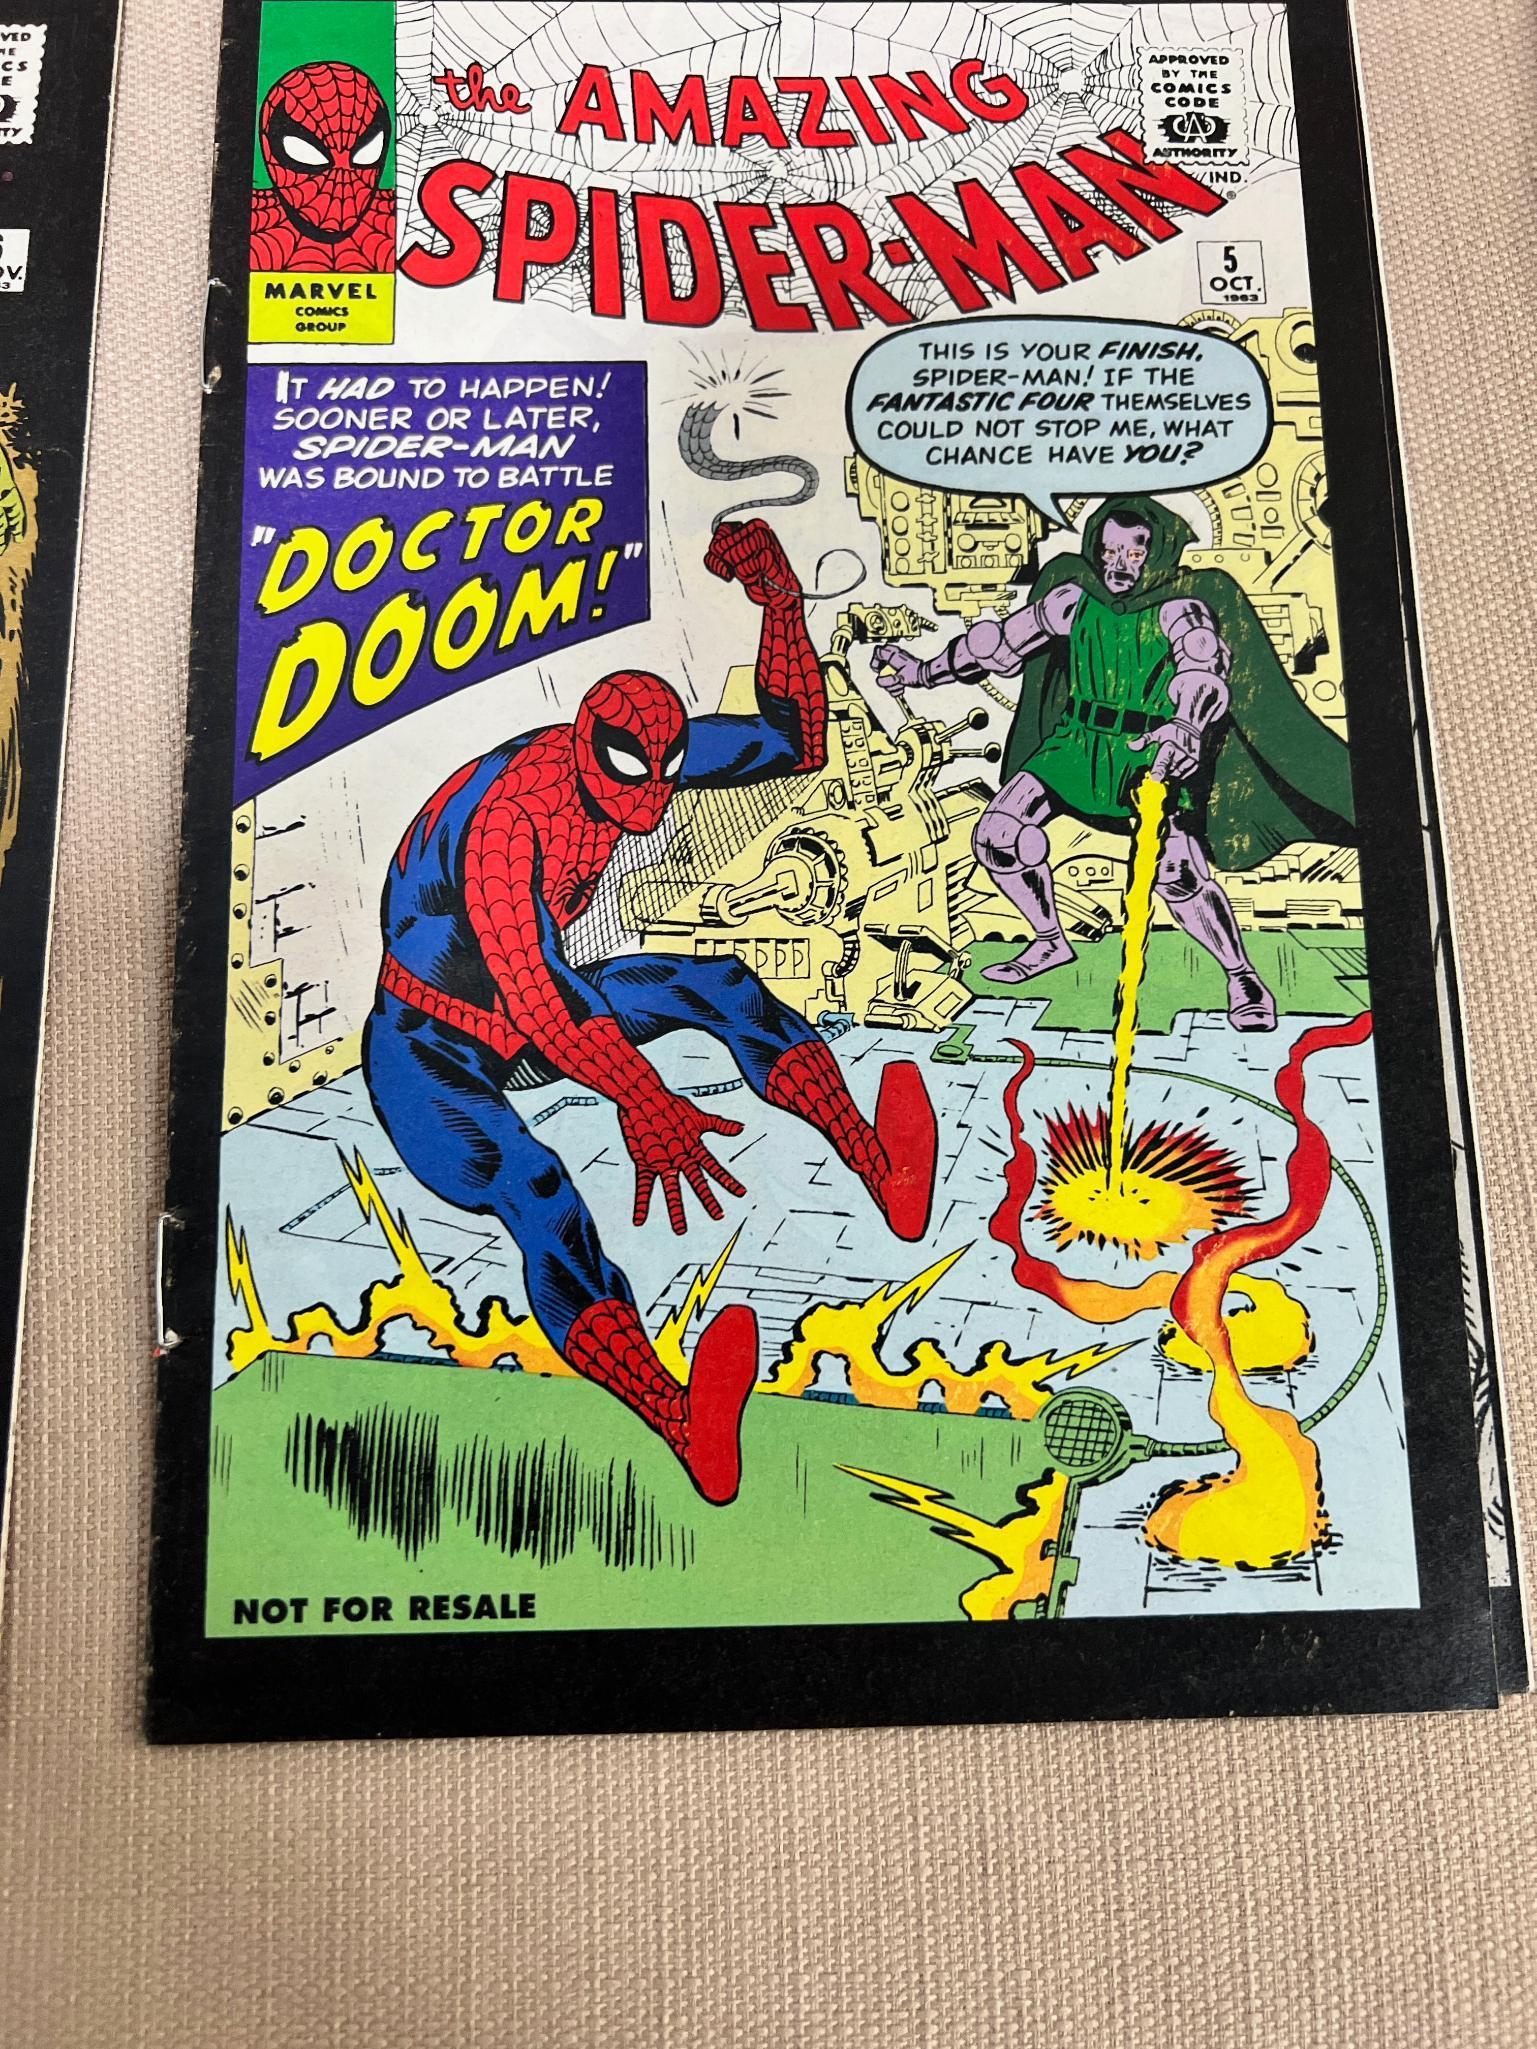 7- Spiderman Comic Books, including some collectible series